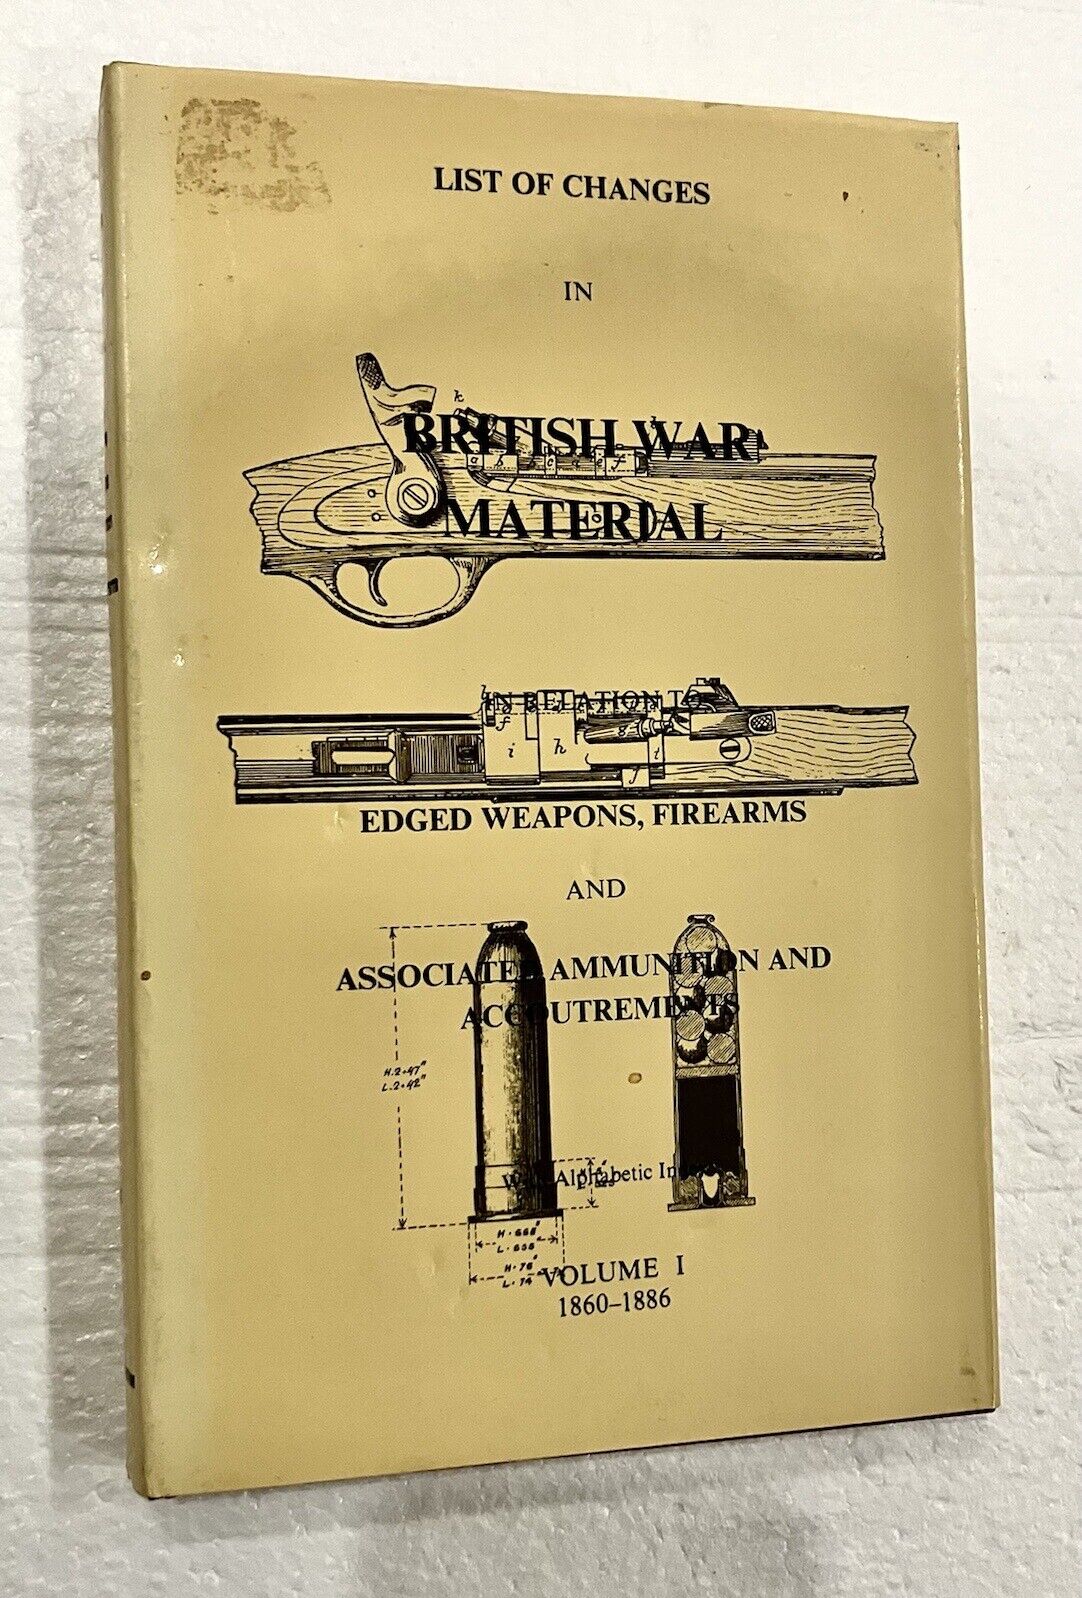 List of Changes in British War Material Weapons Firearms Ammo V.1 1860-1886